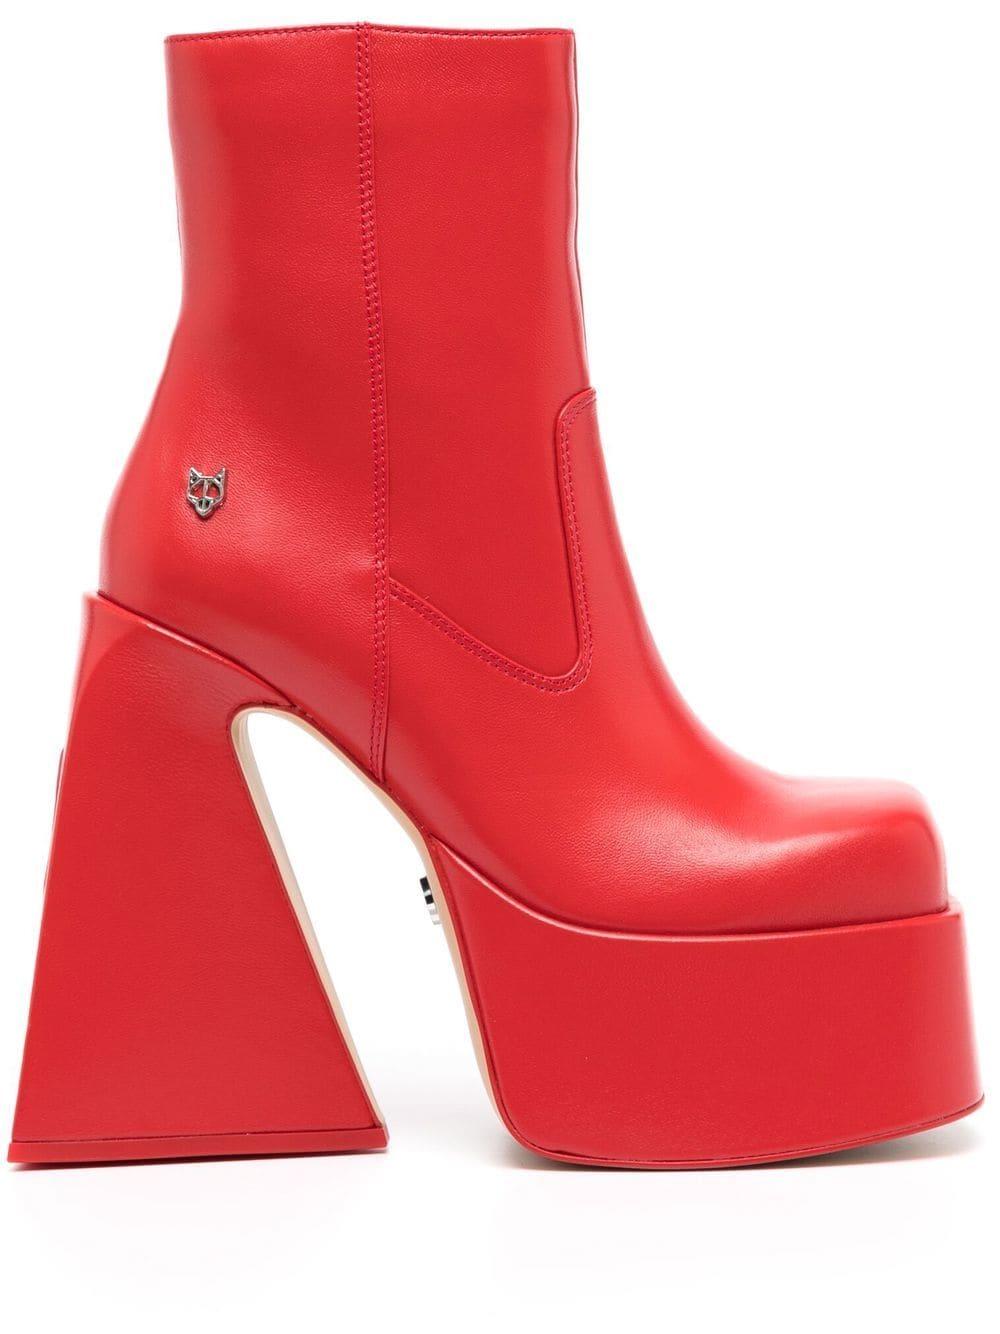 Naked Wolfe Jane Leather Platform Boots in Red | Lyst